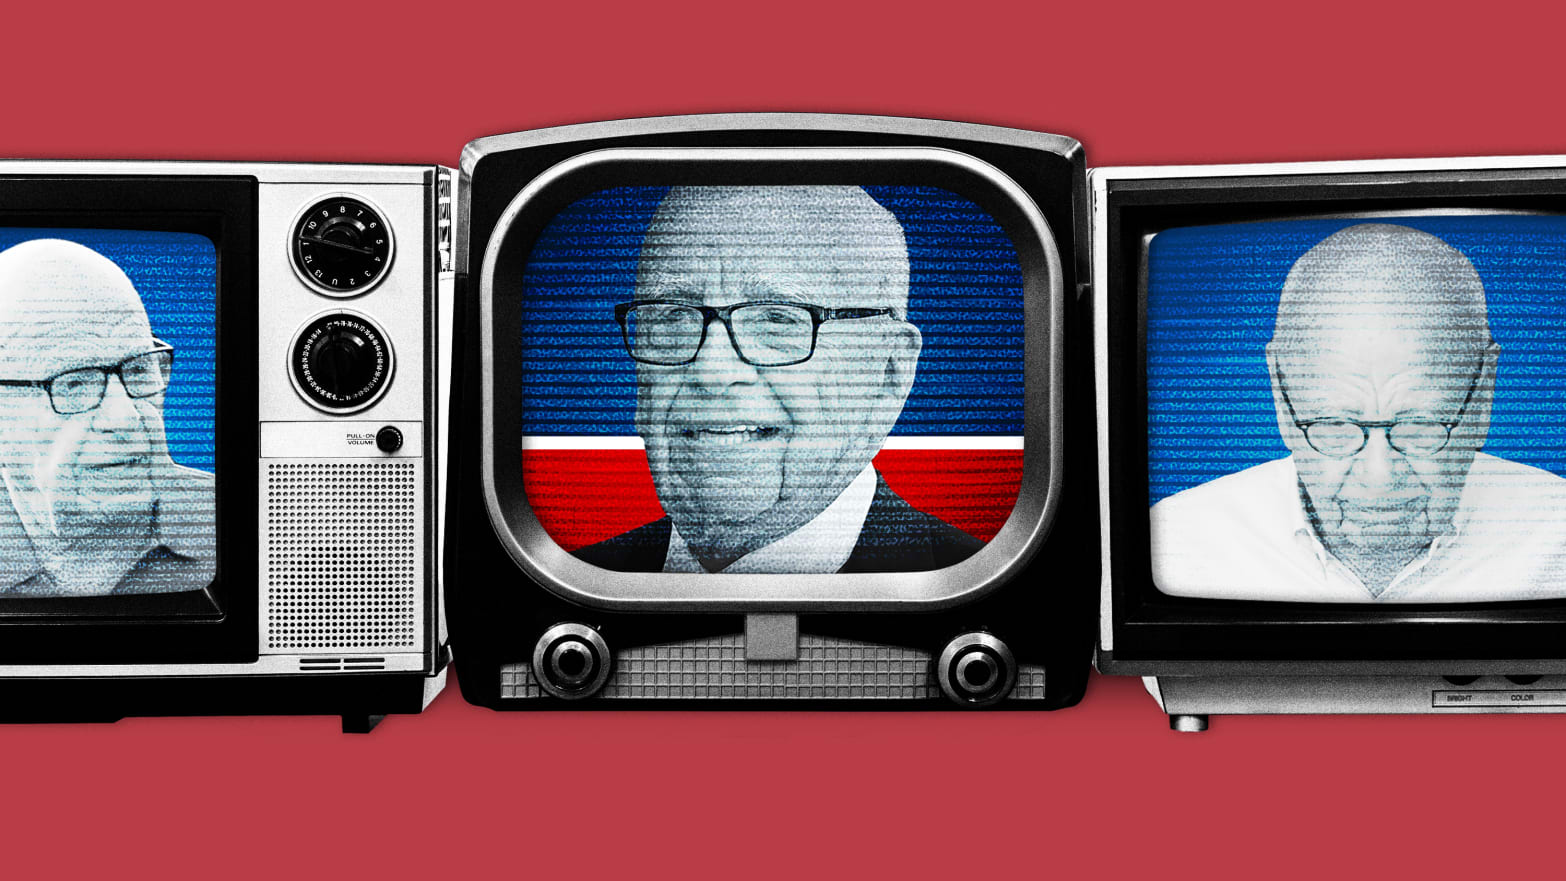 Former Fox Executive: Is It Time for the FCC to Take a Close Look at Rupert Murdoch’s Licenses? (thedailybeast.com)